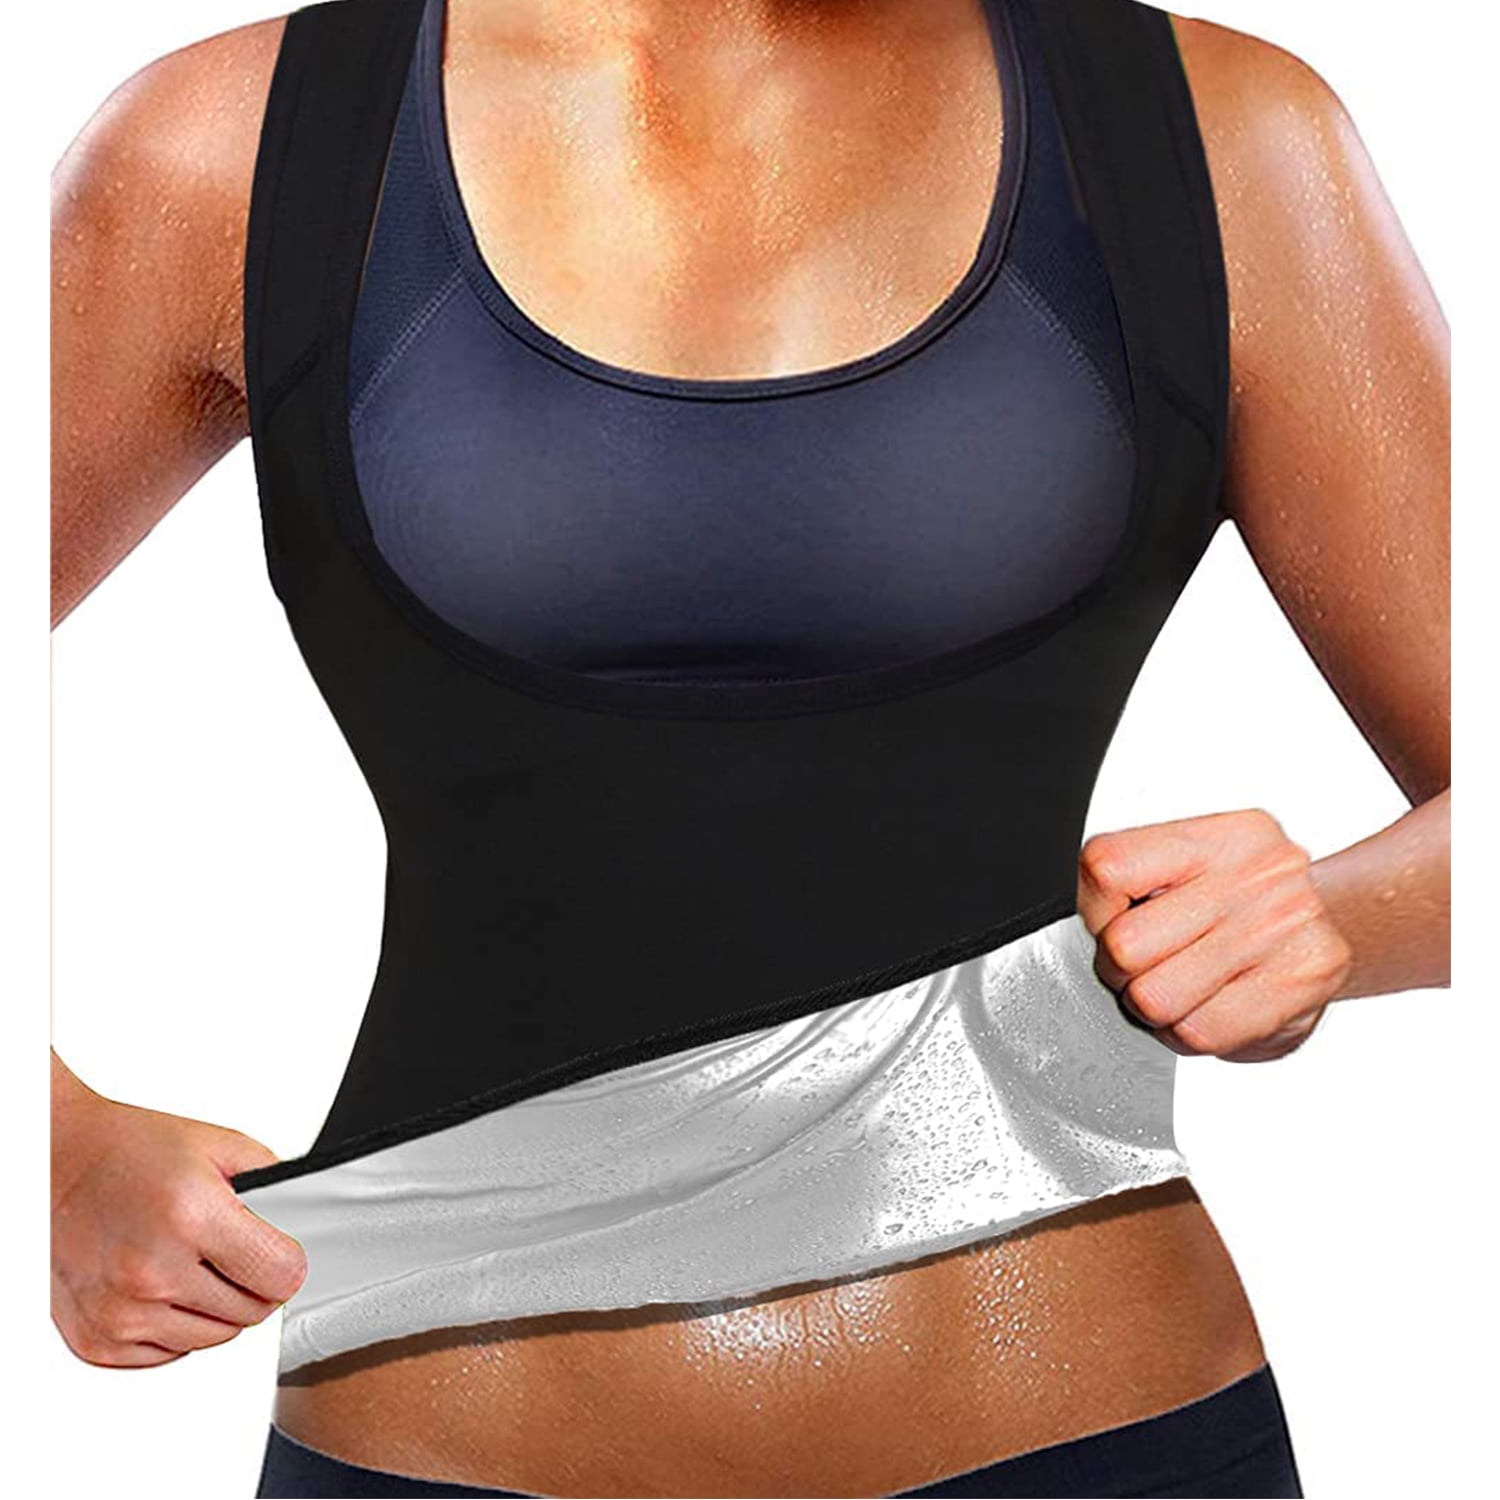 Details about   Womens Sauna Sweat Slimming Vest Neoprene Cami Gym Yoga Thermal Body Shaper US 